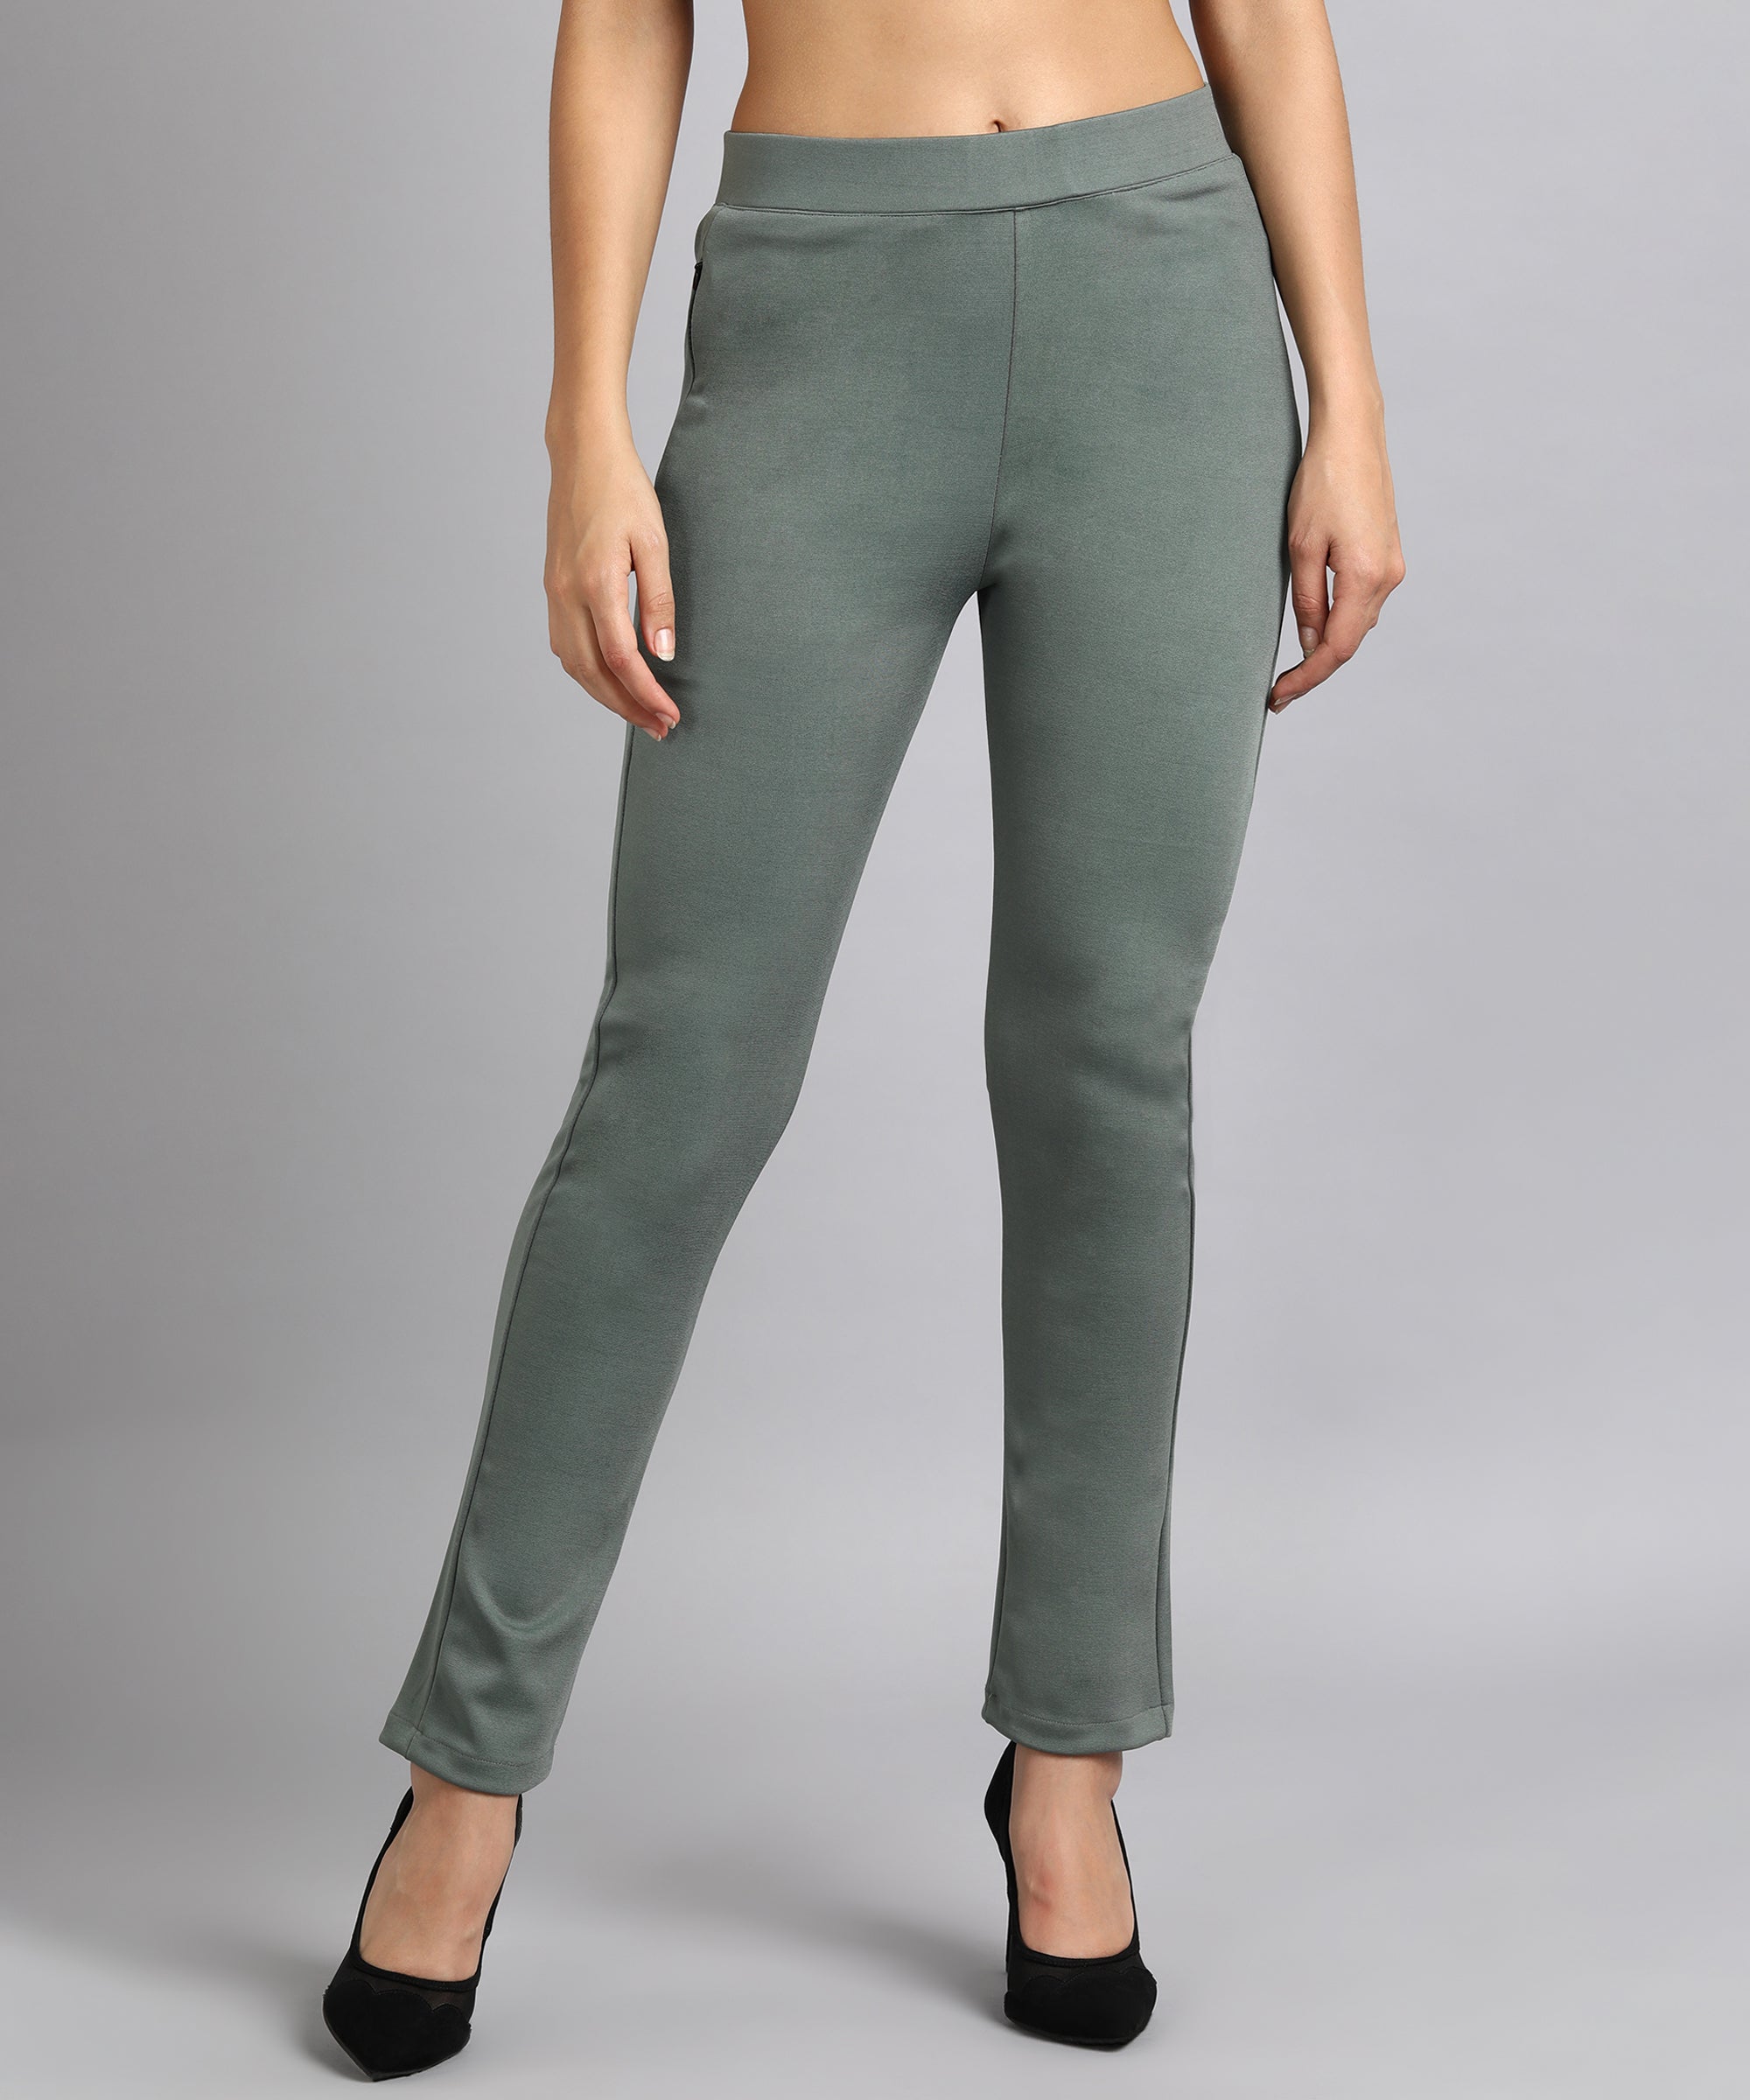 Combo: Beige & Forest Green Cigarette Pants- Set of 2 – Thevasa